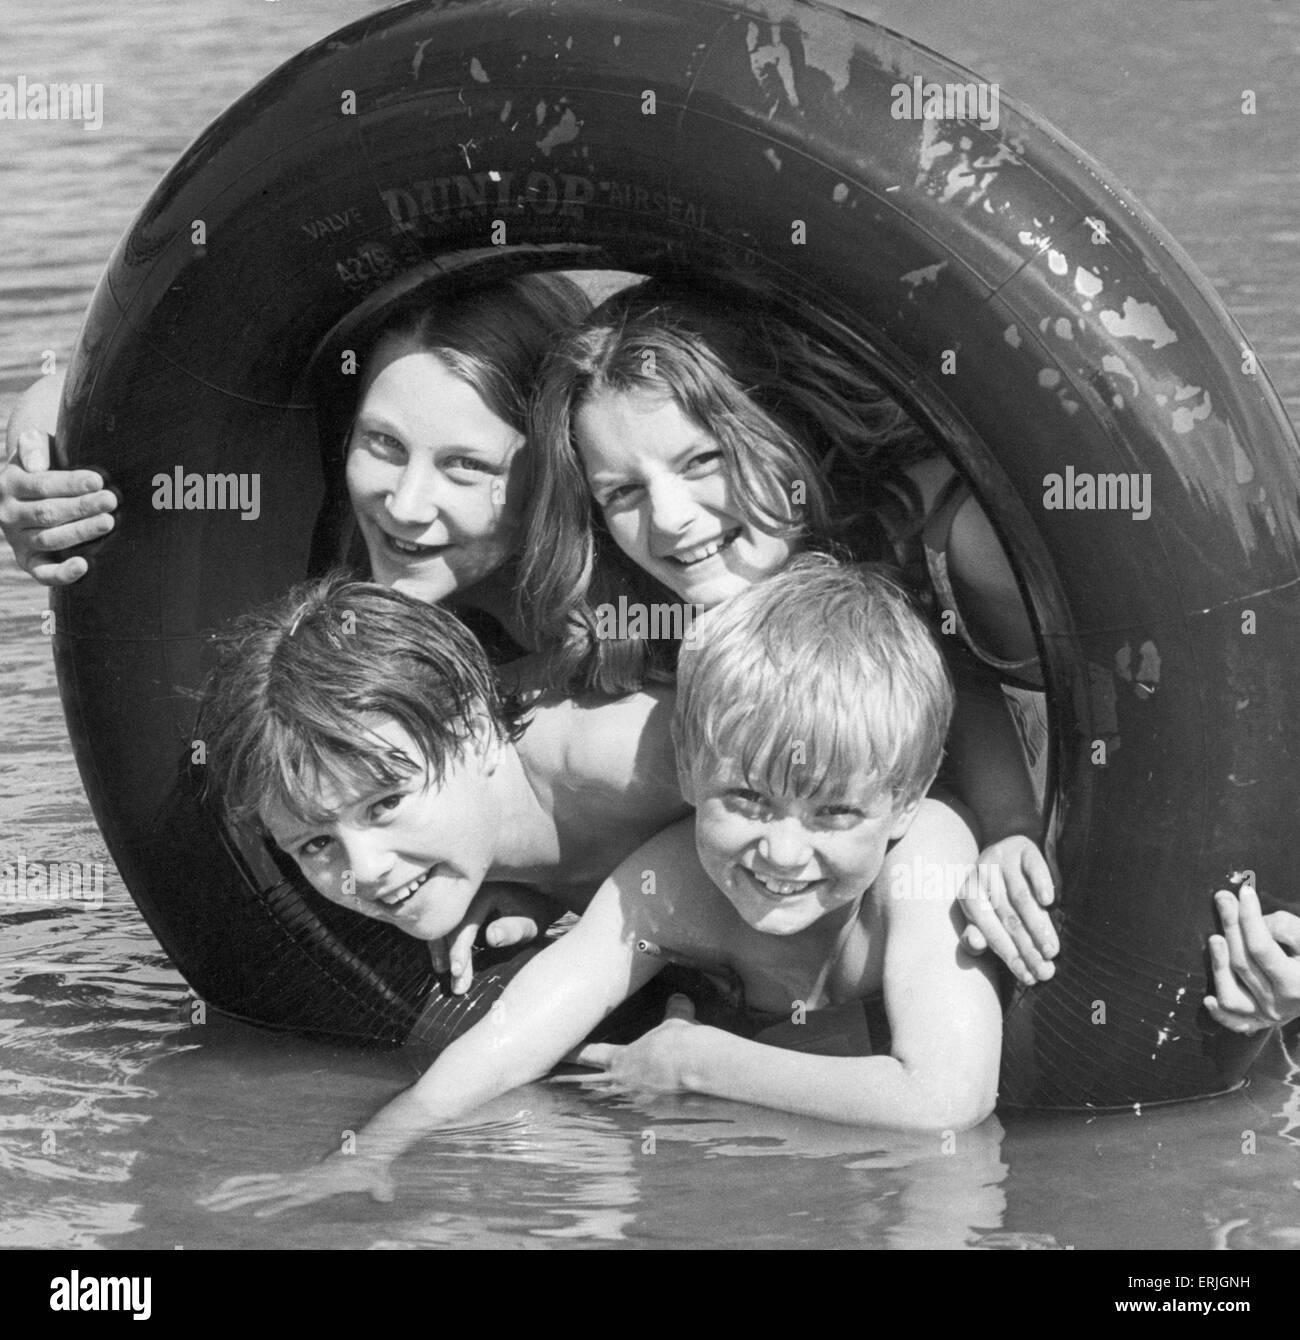 Water, sun and an old tyre...what more could one ask? Having fun at Binley Road paddling pool, Coventry, are (top left) Julie Packer 12, and Brenda Medforth 12 and (lower left) David Medforth 11 and Andrew Muller 8. 5th August 1977 Stock Photo